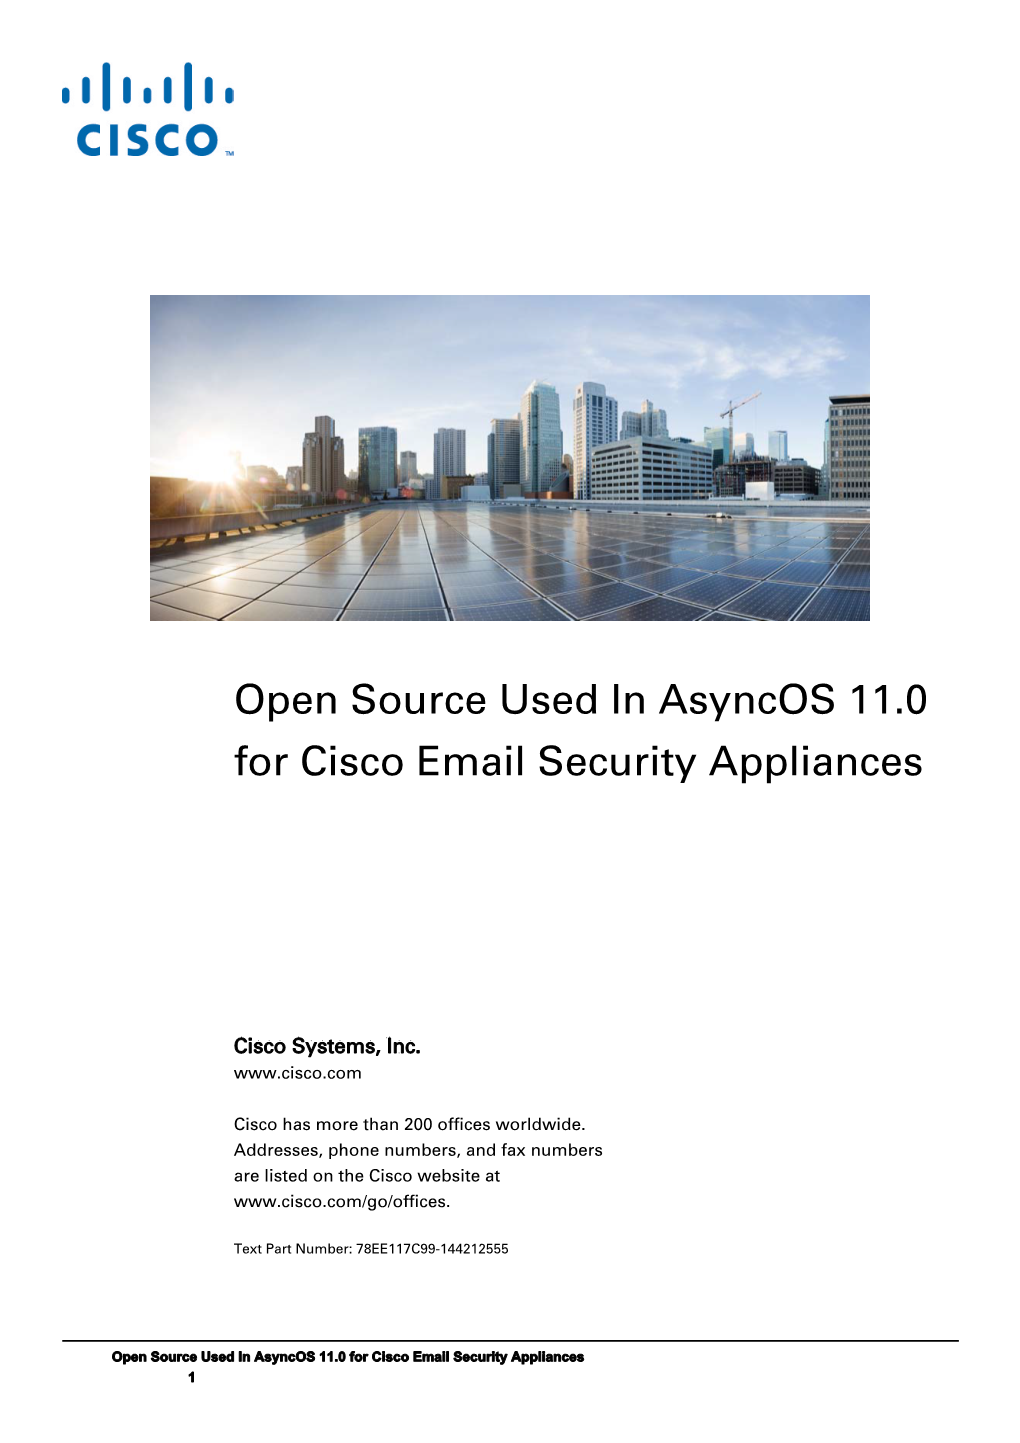 Open Source Used in Asyncos 11.0 for Cisco Email Security Appliances